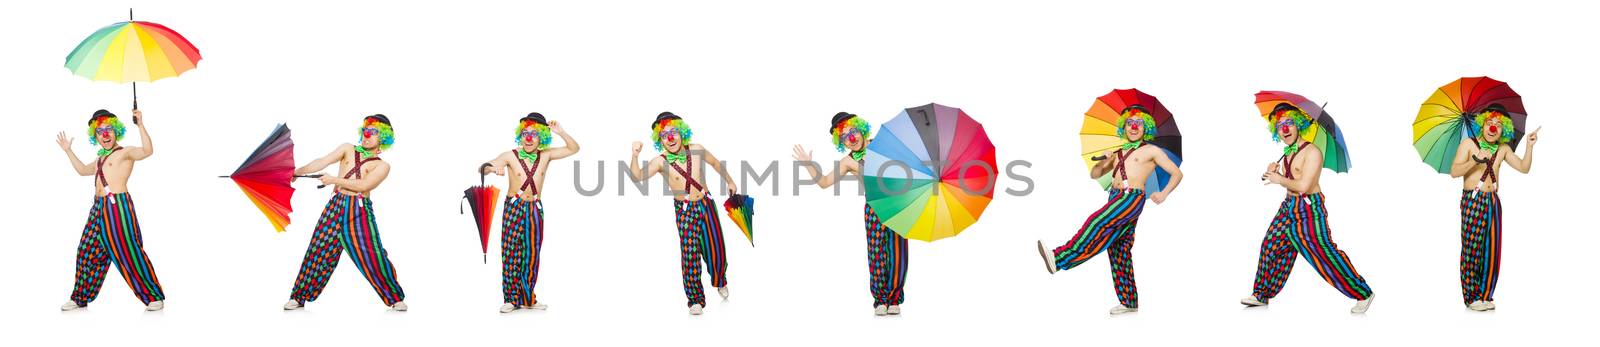 Clown with umbrella isolated on white by Elnur